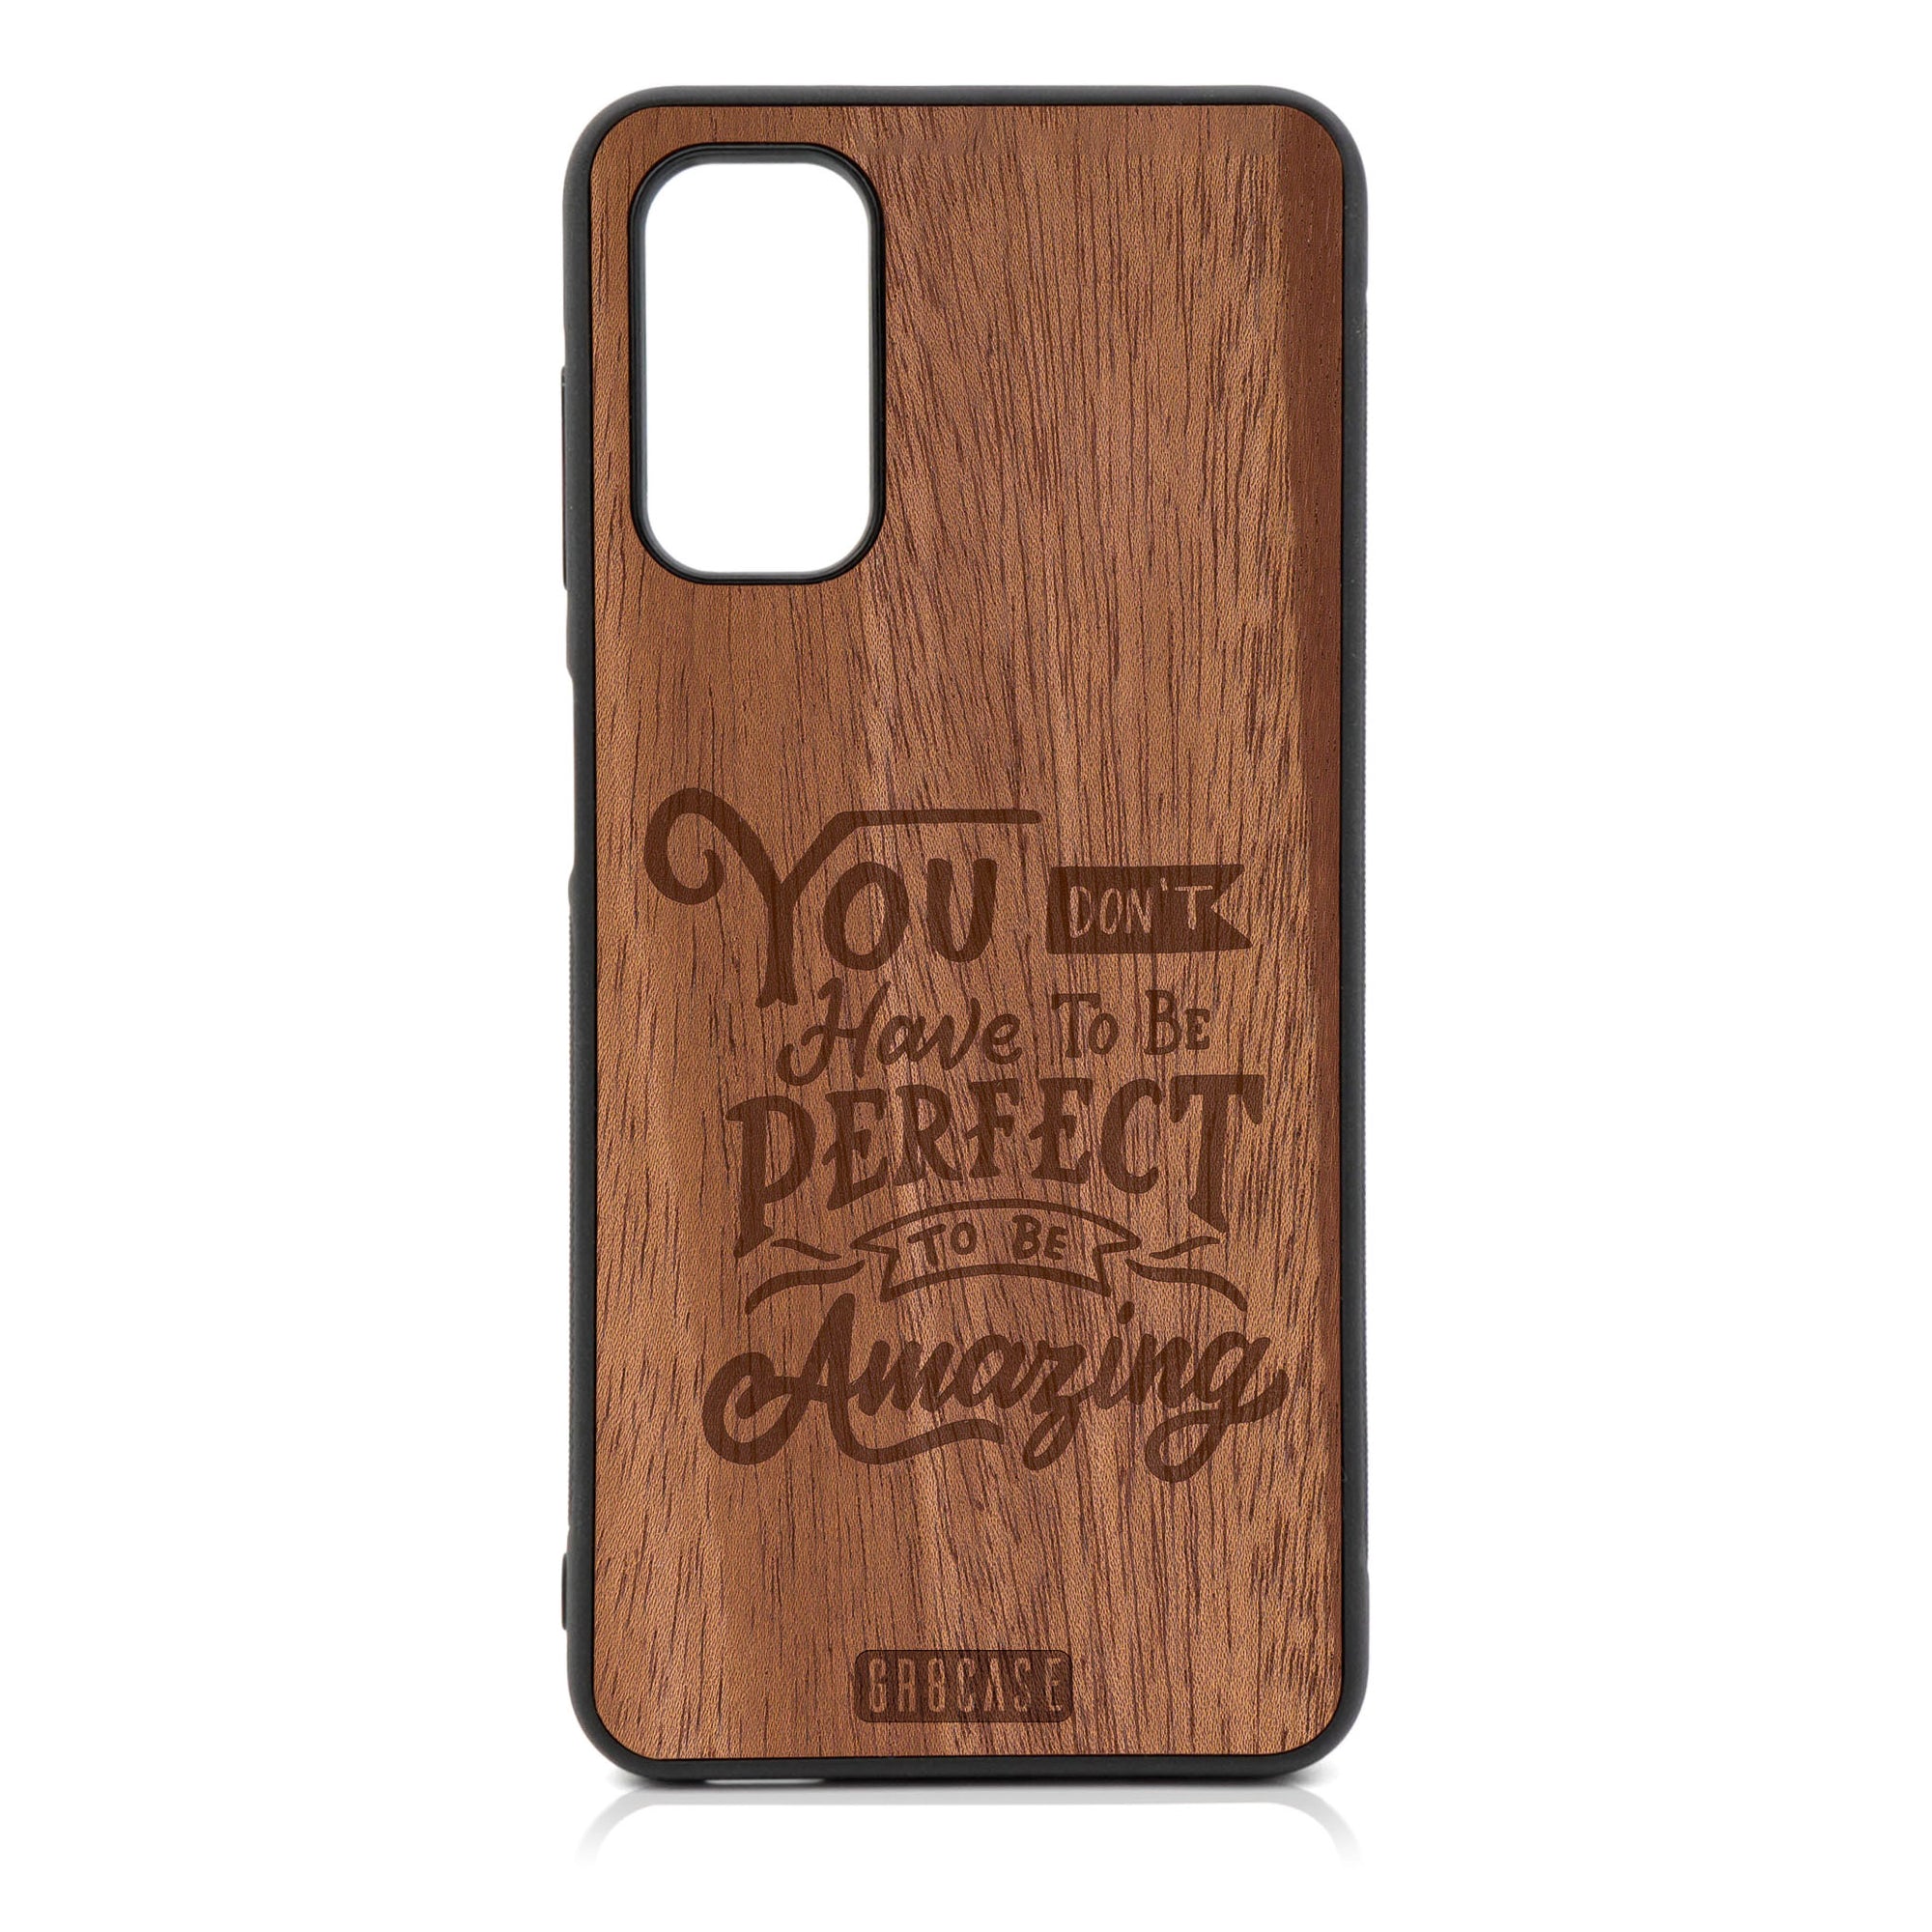 You Don't Have To Be Perfect To Be Amazing Design Wood Case For Galaxy A13 5G